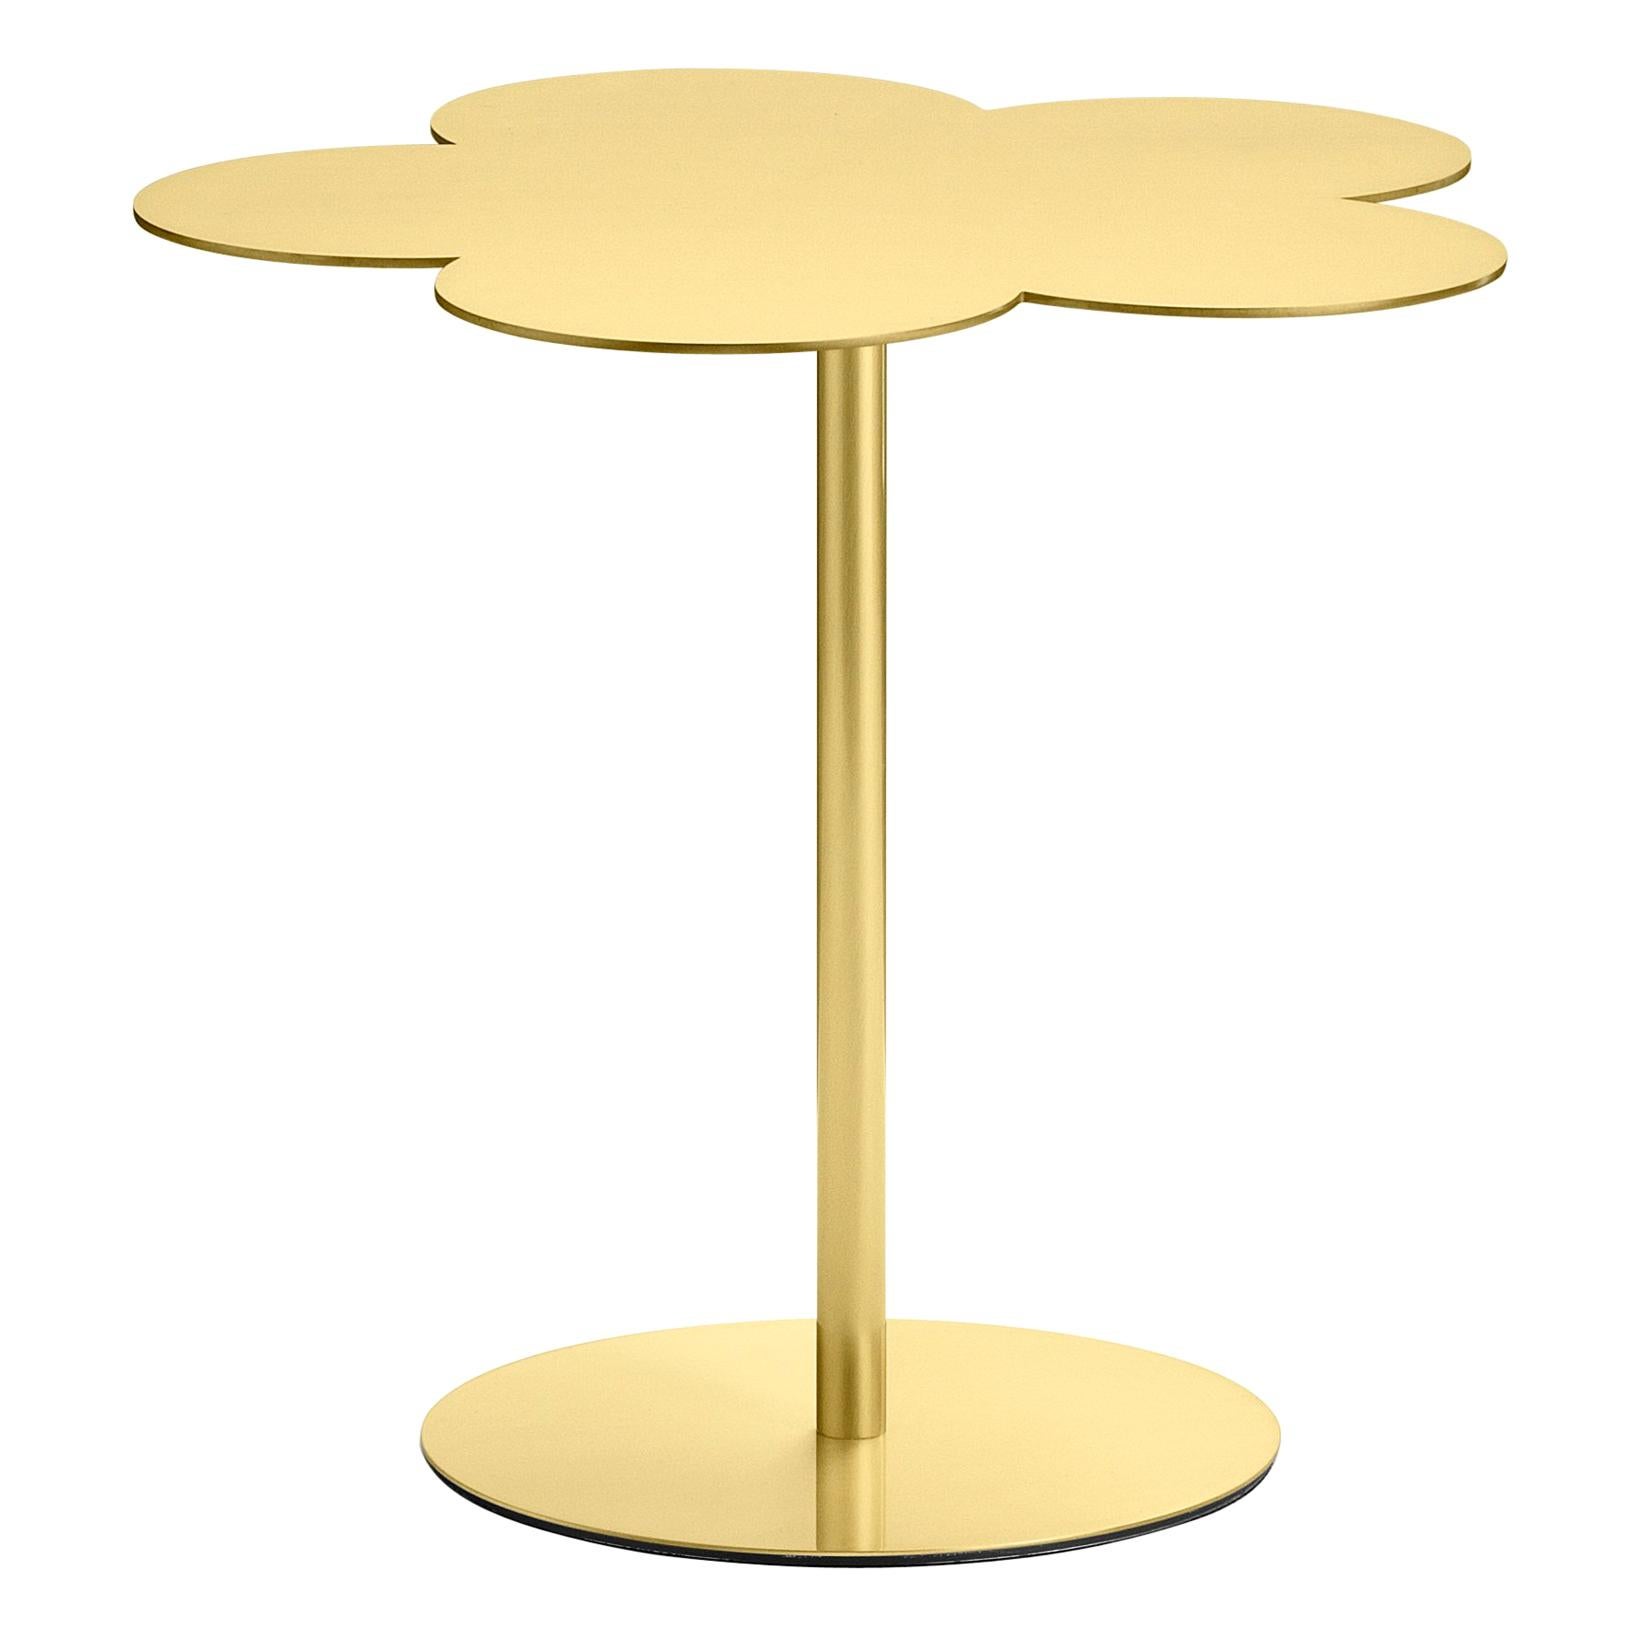 Ghidini 1961 Medium Flowers Coffee Side Table in Brass by Stefano Giovannoni